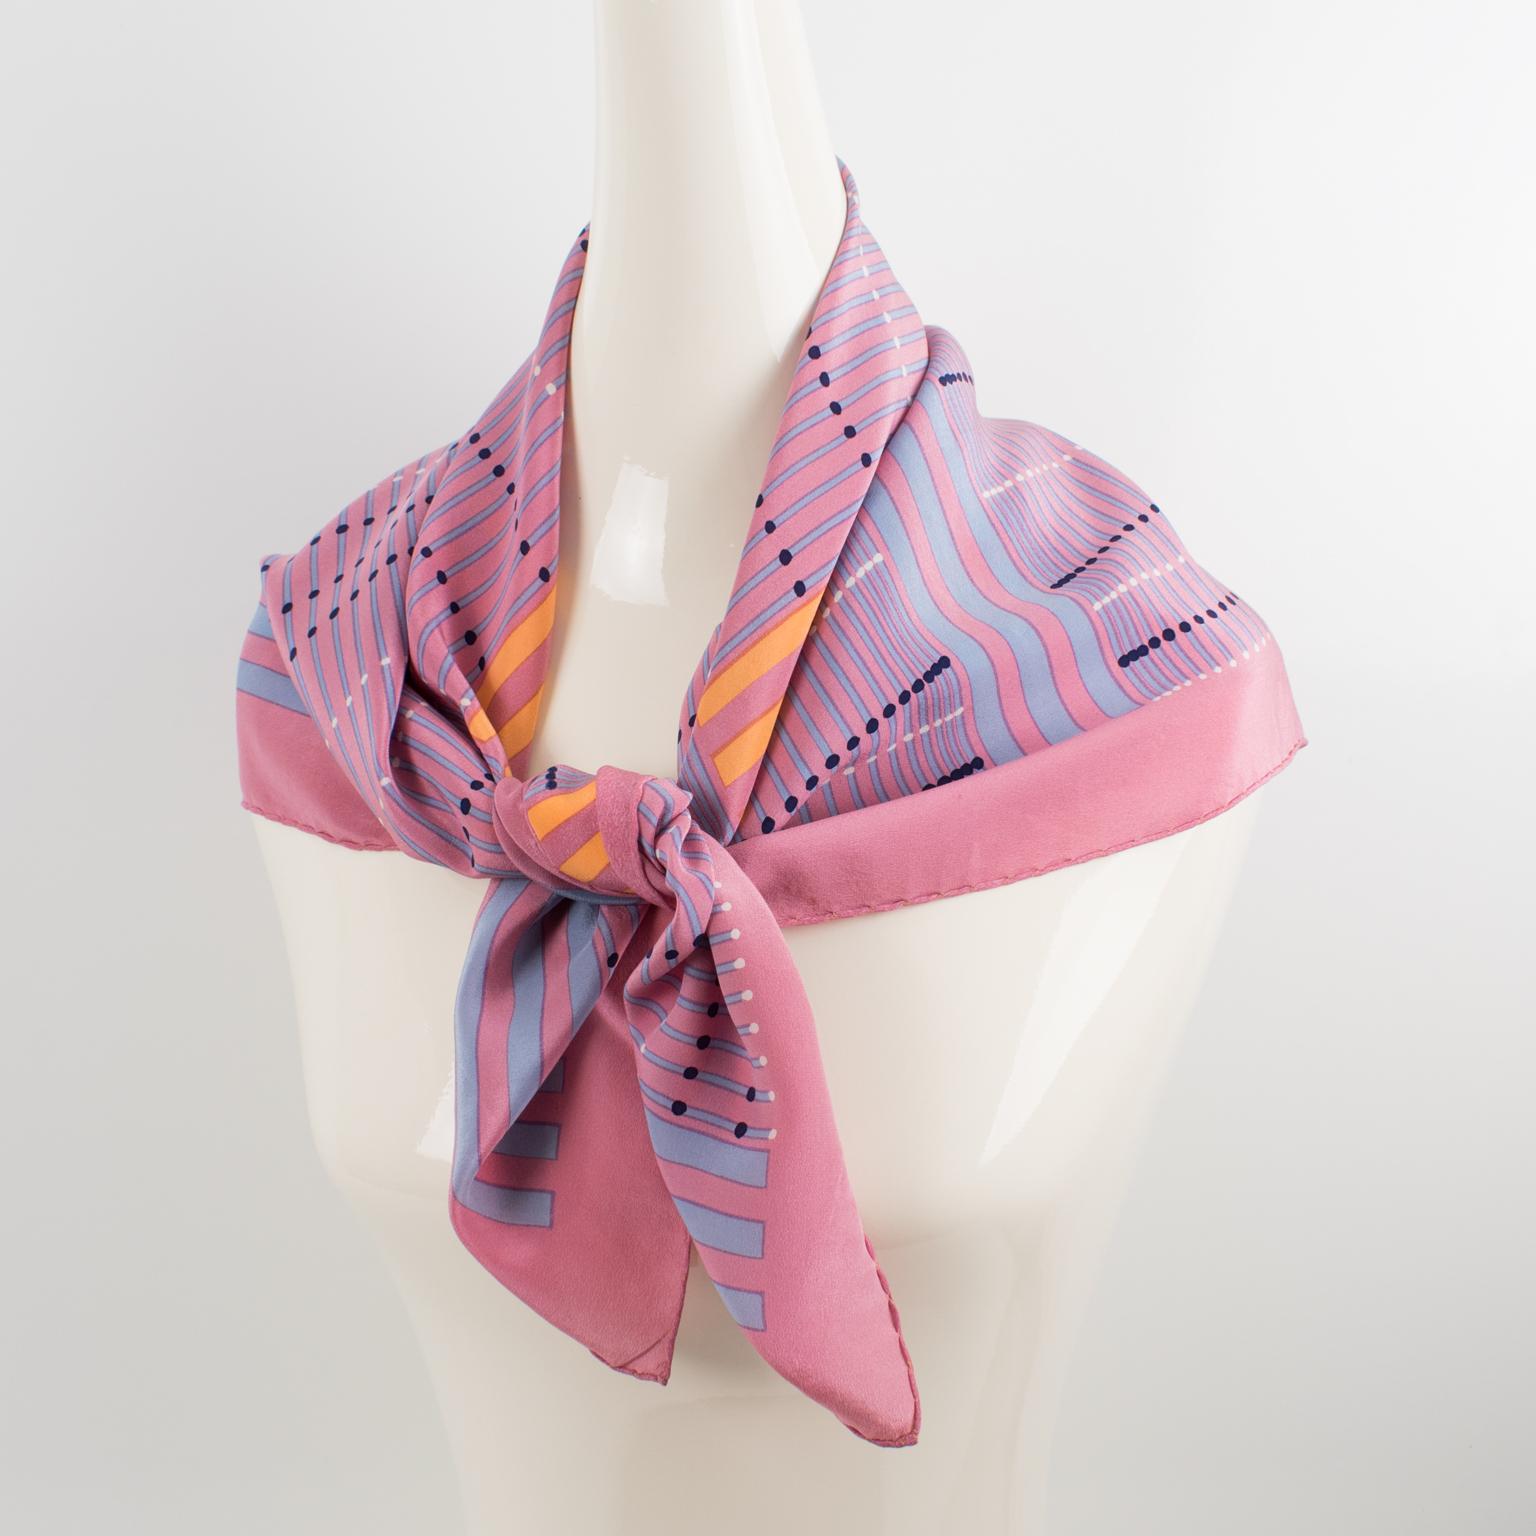 This lovely silk scarf by Christian Dior Paris in pink and orange colors features a geometric design print. The Christian Dior's signature name is in the lower right corner. The combination of colors is bright and vibrant, with ballet sleeper pink,